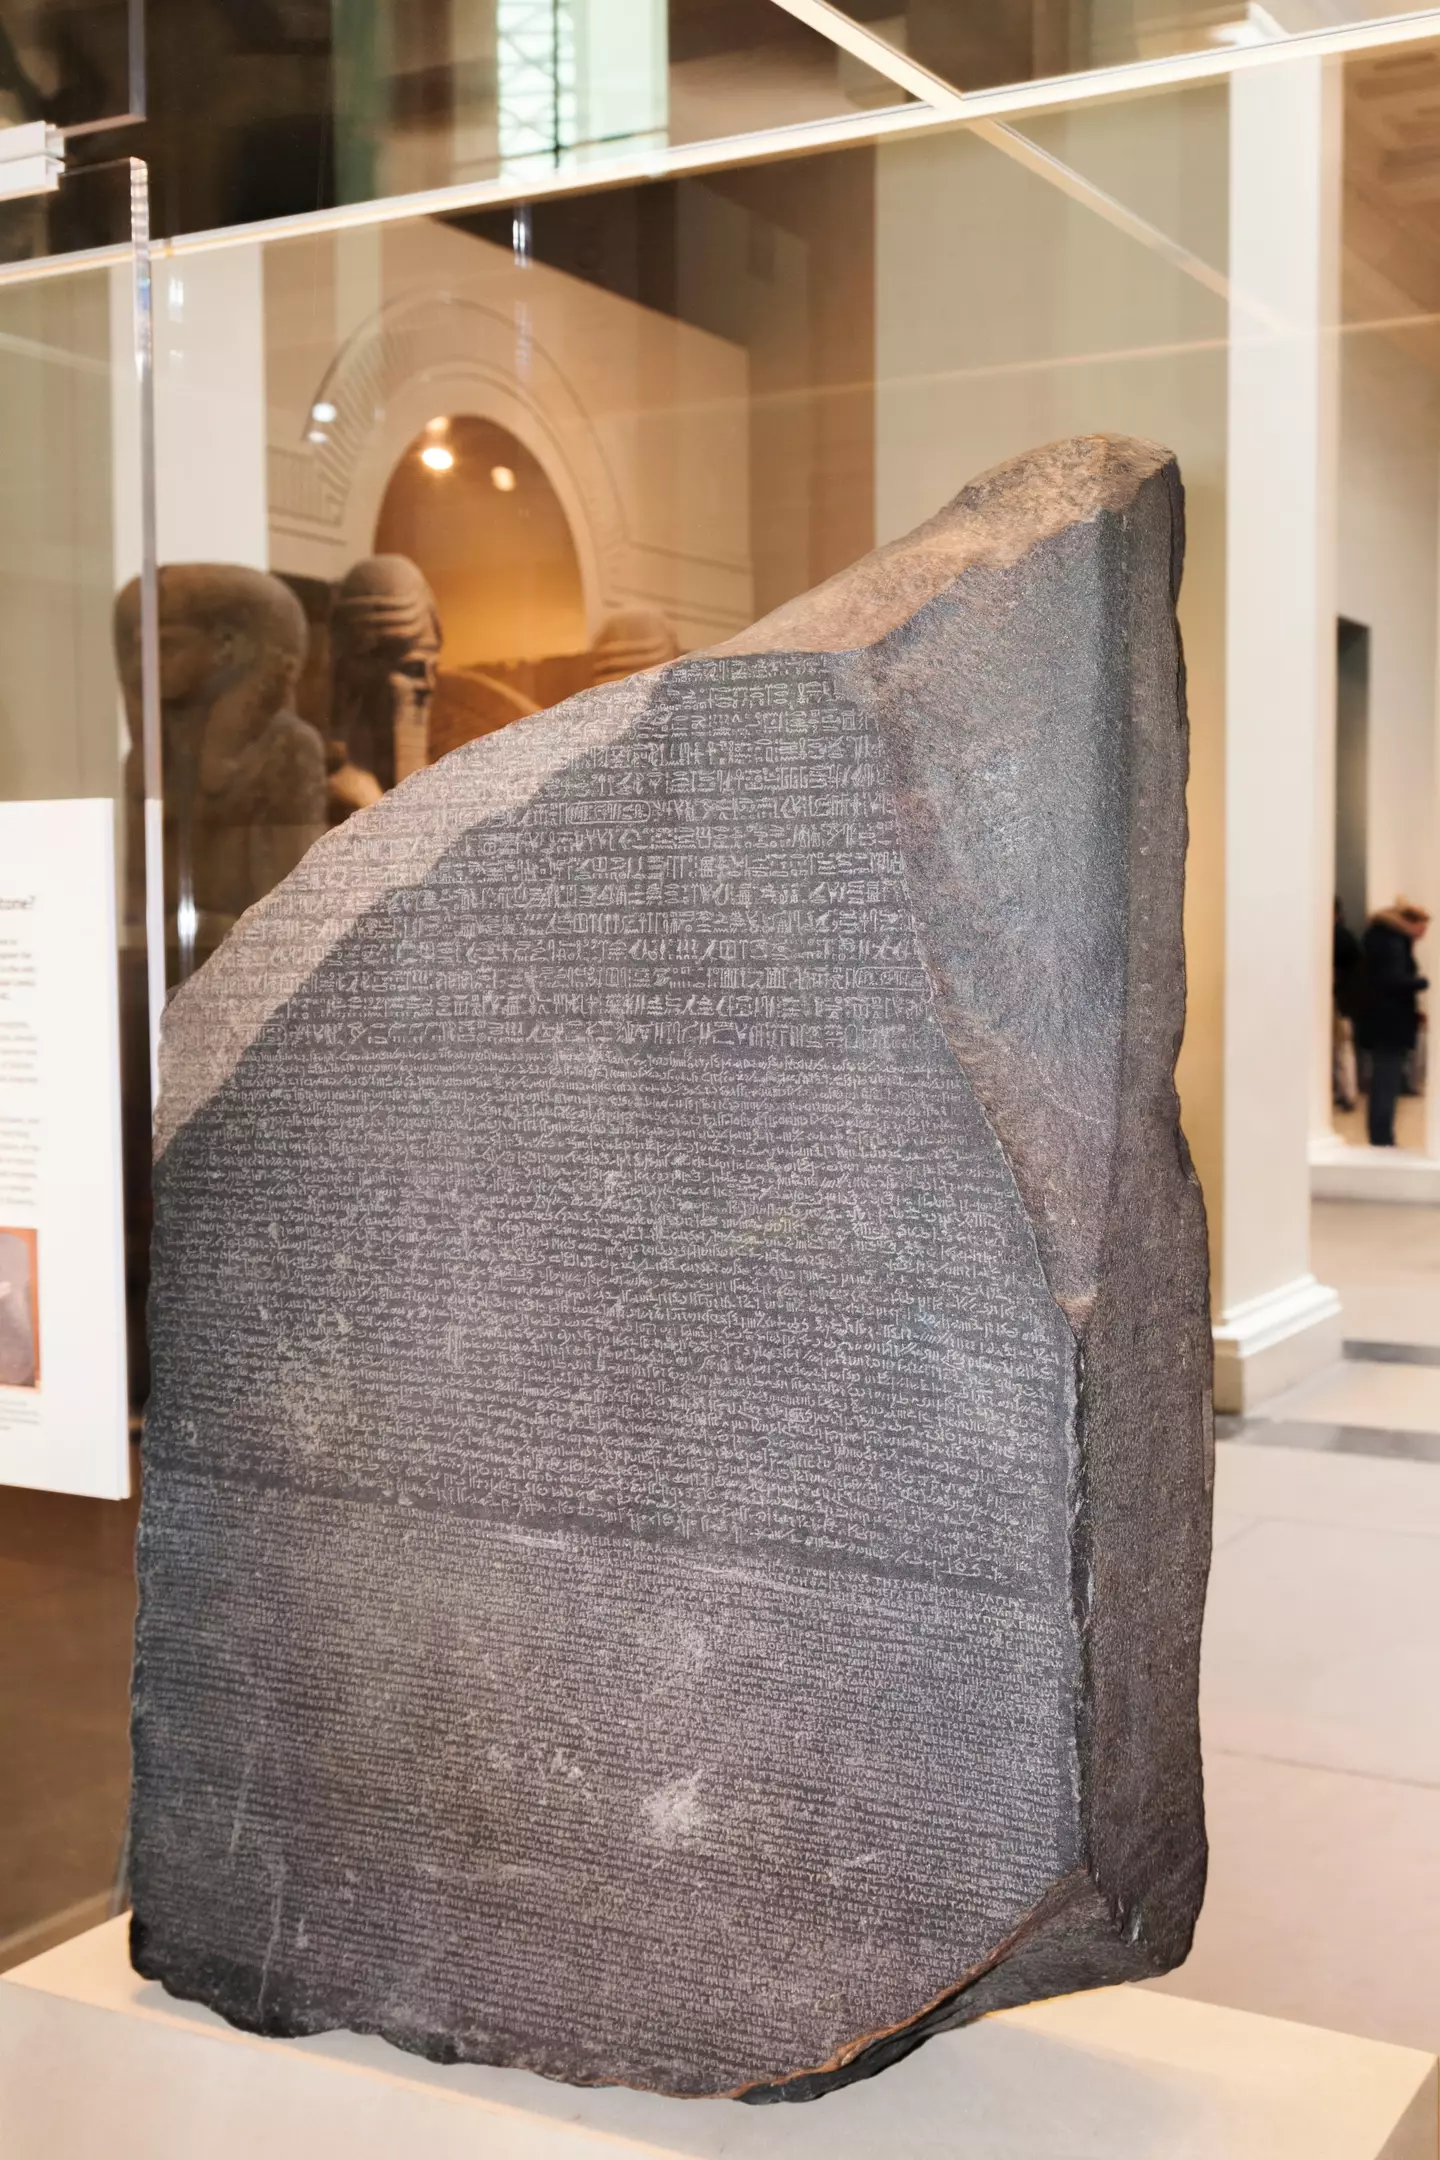 The stone is currently being held at the British Museum.